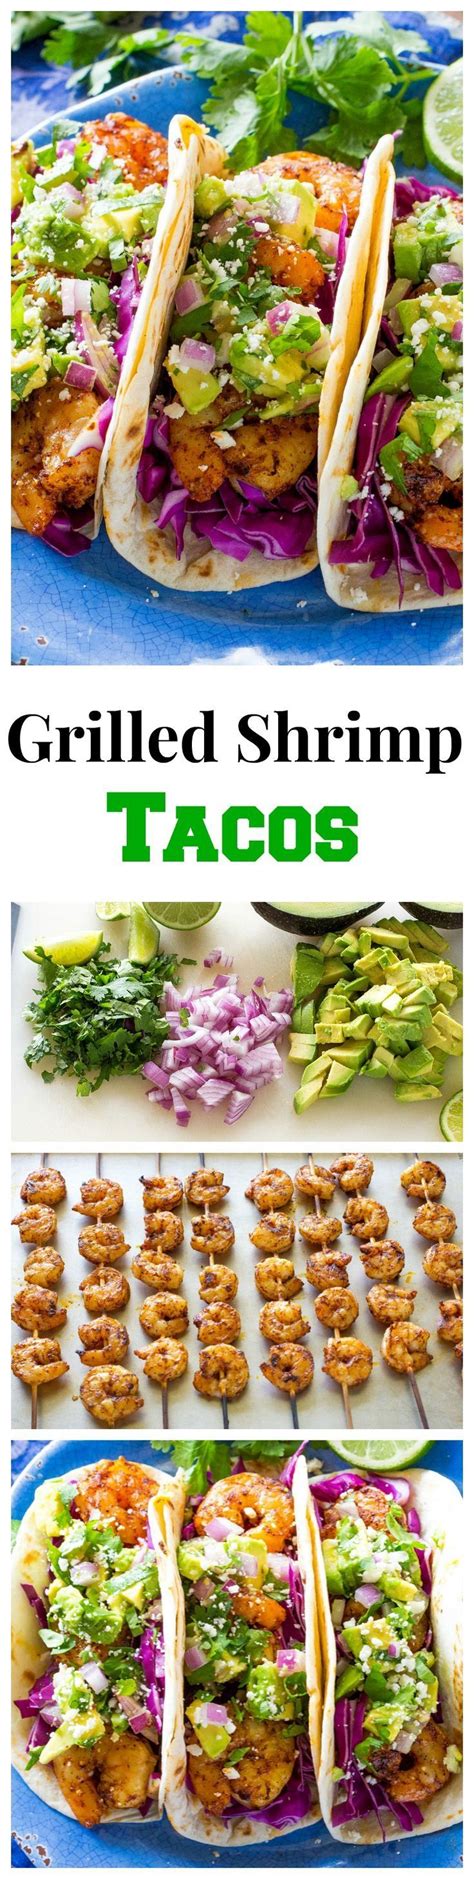 These grilled fish tacos are my take on the fish tacos we've enjoyed while traveling to beach towns where the fish is fresh, the tortillas tender, and the salsa light and flavorful. Grilled Shrimp Tacos with Avocado Salsa - The Girl Who Ate ...